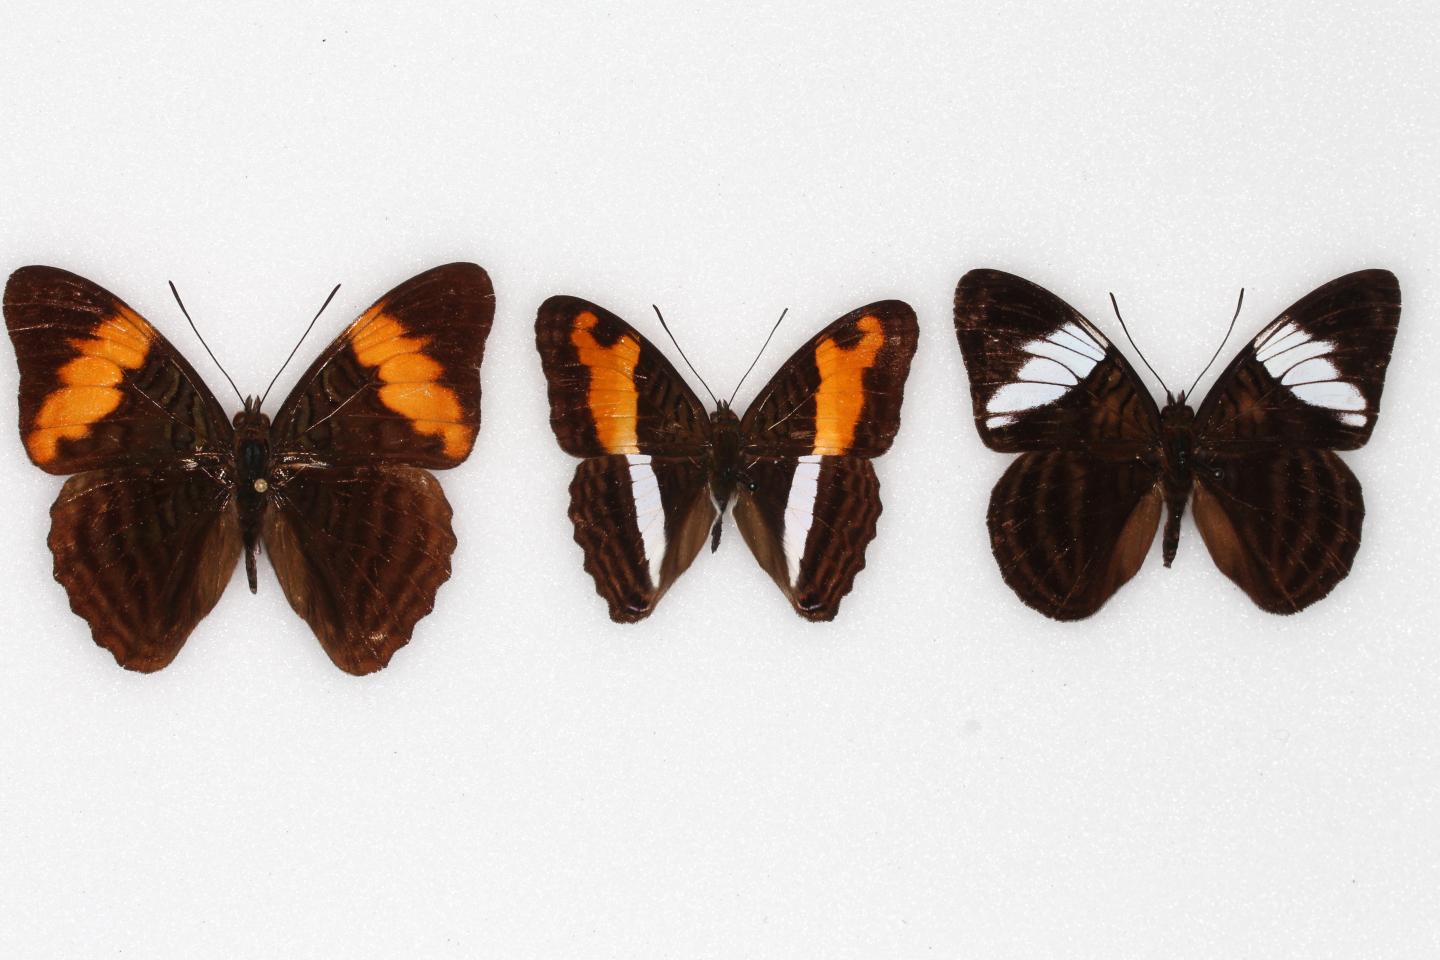 Some Butterflies' Flashy Patterns Could Mean 'Can't Catch Me'